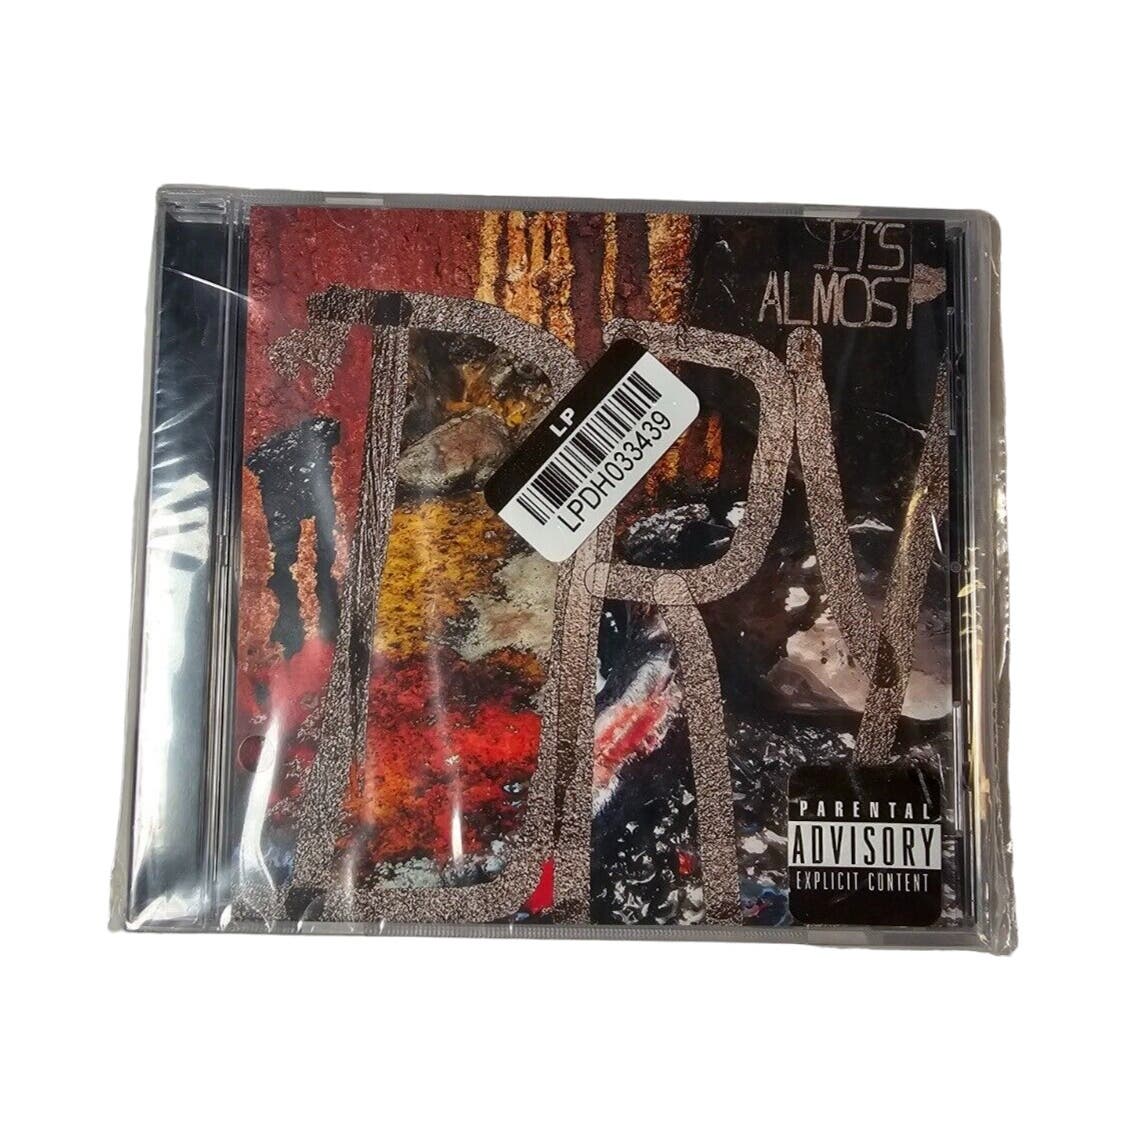 It’s Almost Dry CD, G.O.O.D. Music